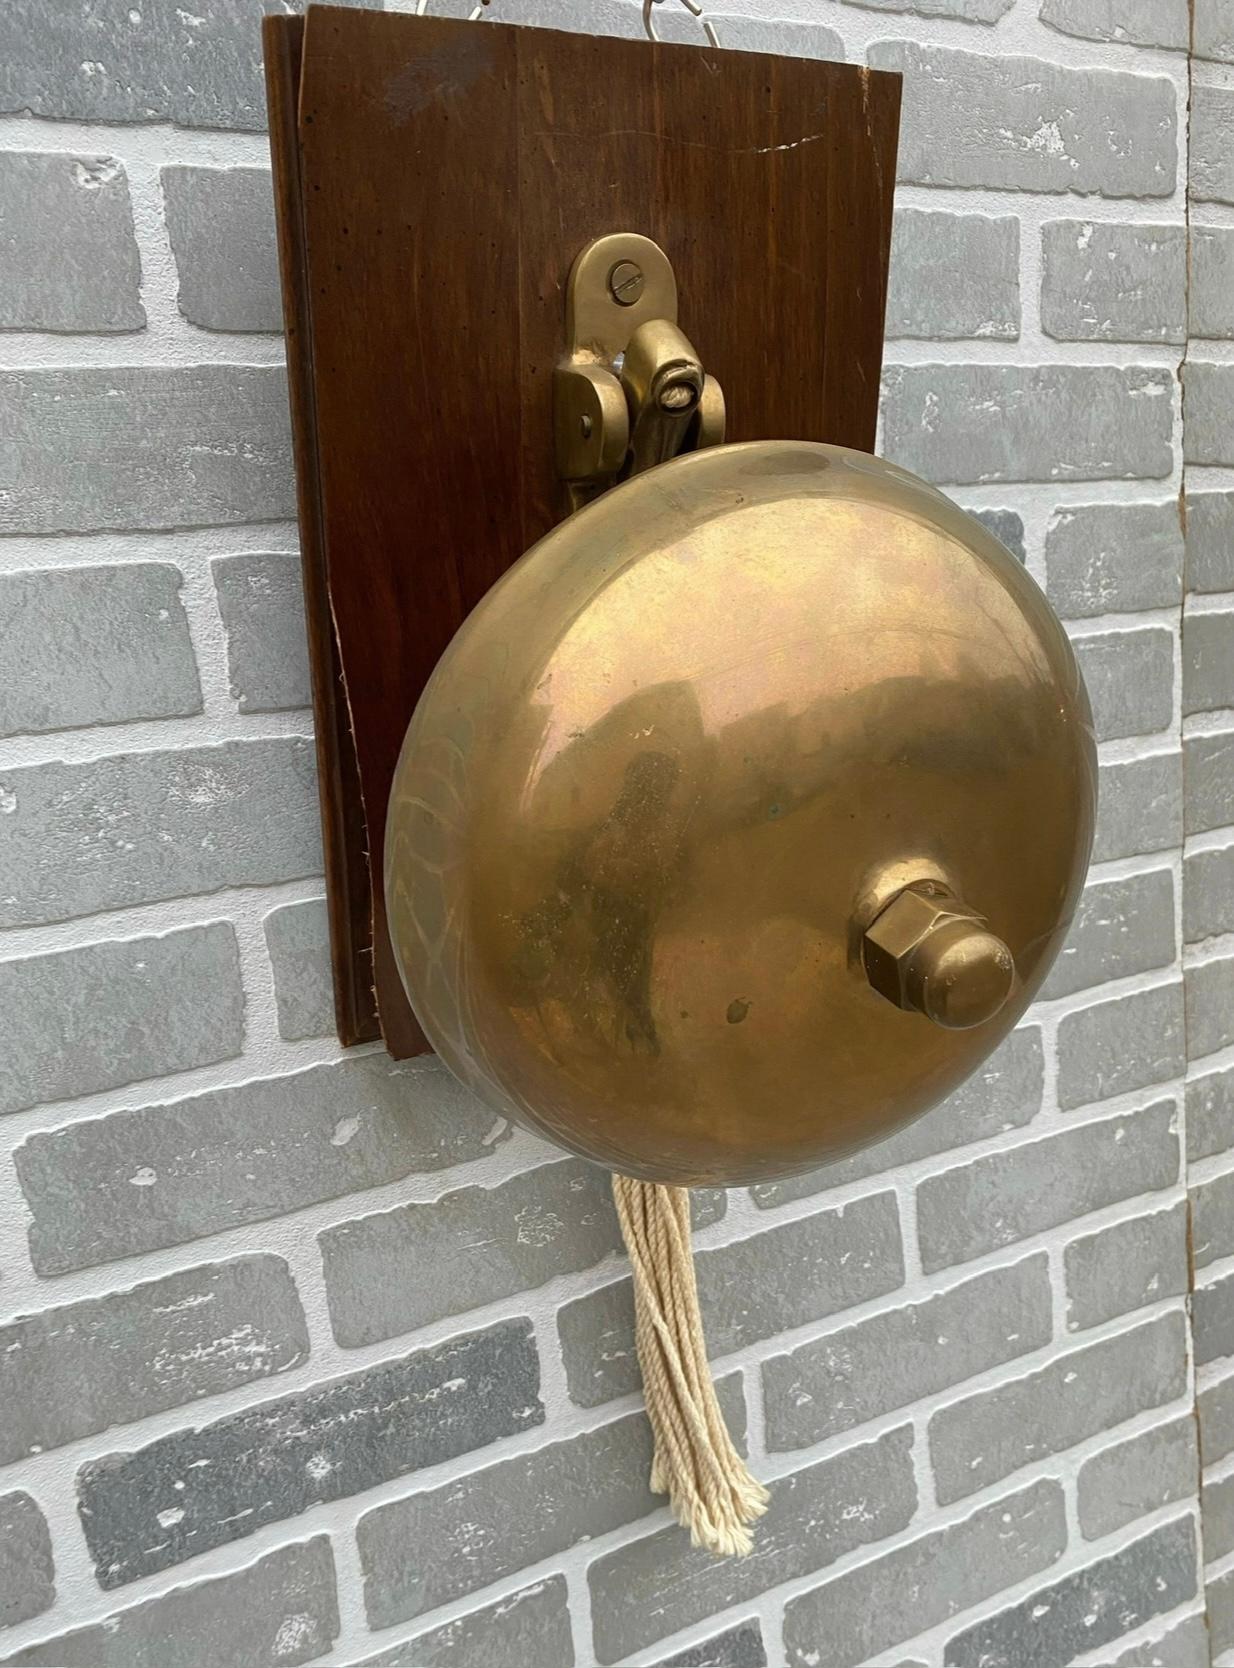 Vintage Brass Ringside Boxing Ring Bell on Wood Plaque 

USA Vintage Brass Boxing Club, Boxing Ring Referee's Rounds Bell. It is the right tone you will recognize. Fully Functional and Ready to Mount. Great piece to add to a boys room, mens cave or